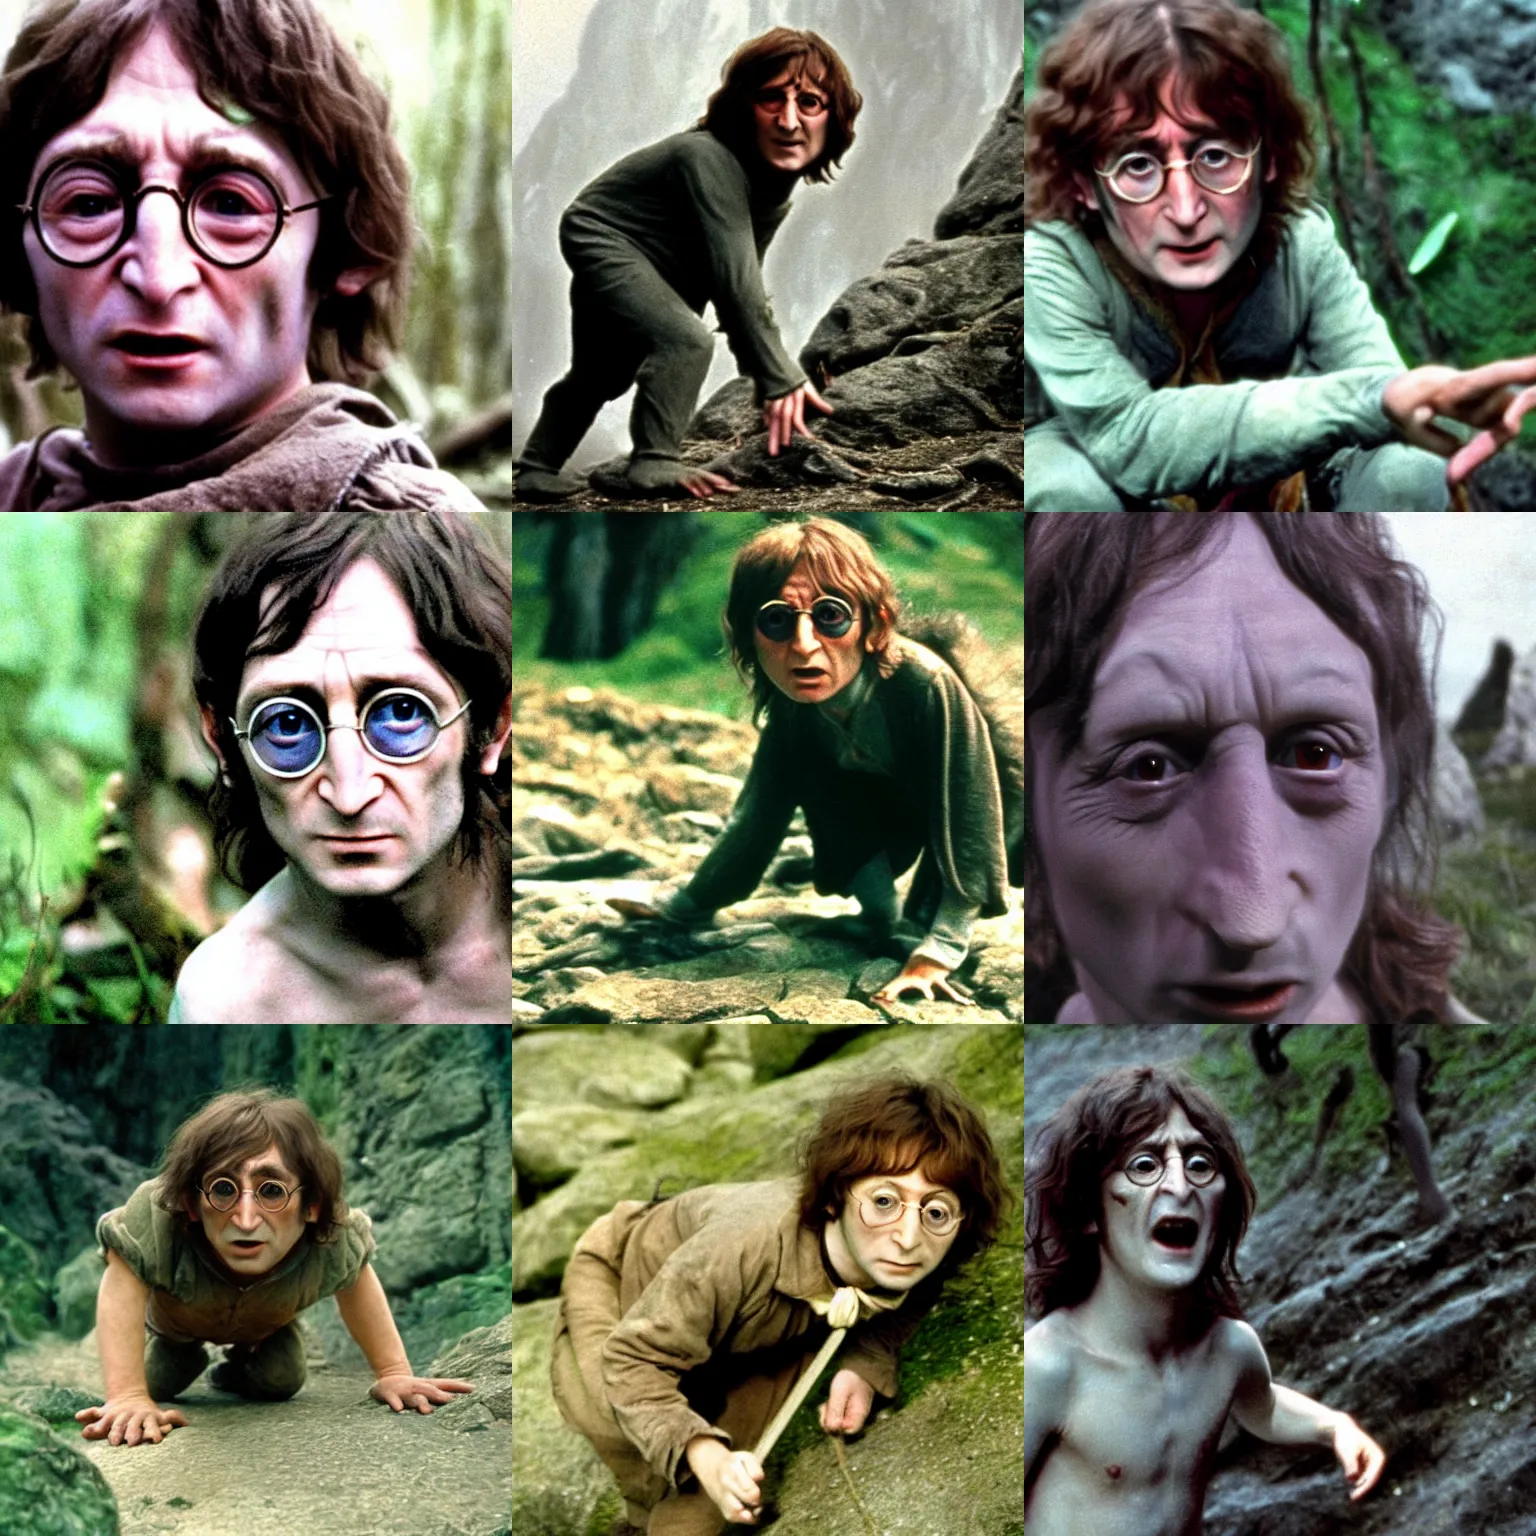 Prompt: A full color still of young John Lennon in Gollum makeup and costume, on all fours, in The Lord of the Rings directed by Stanley Kubrick,